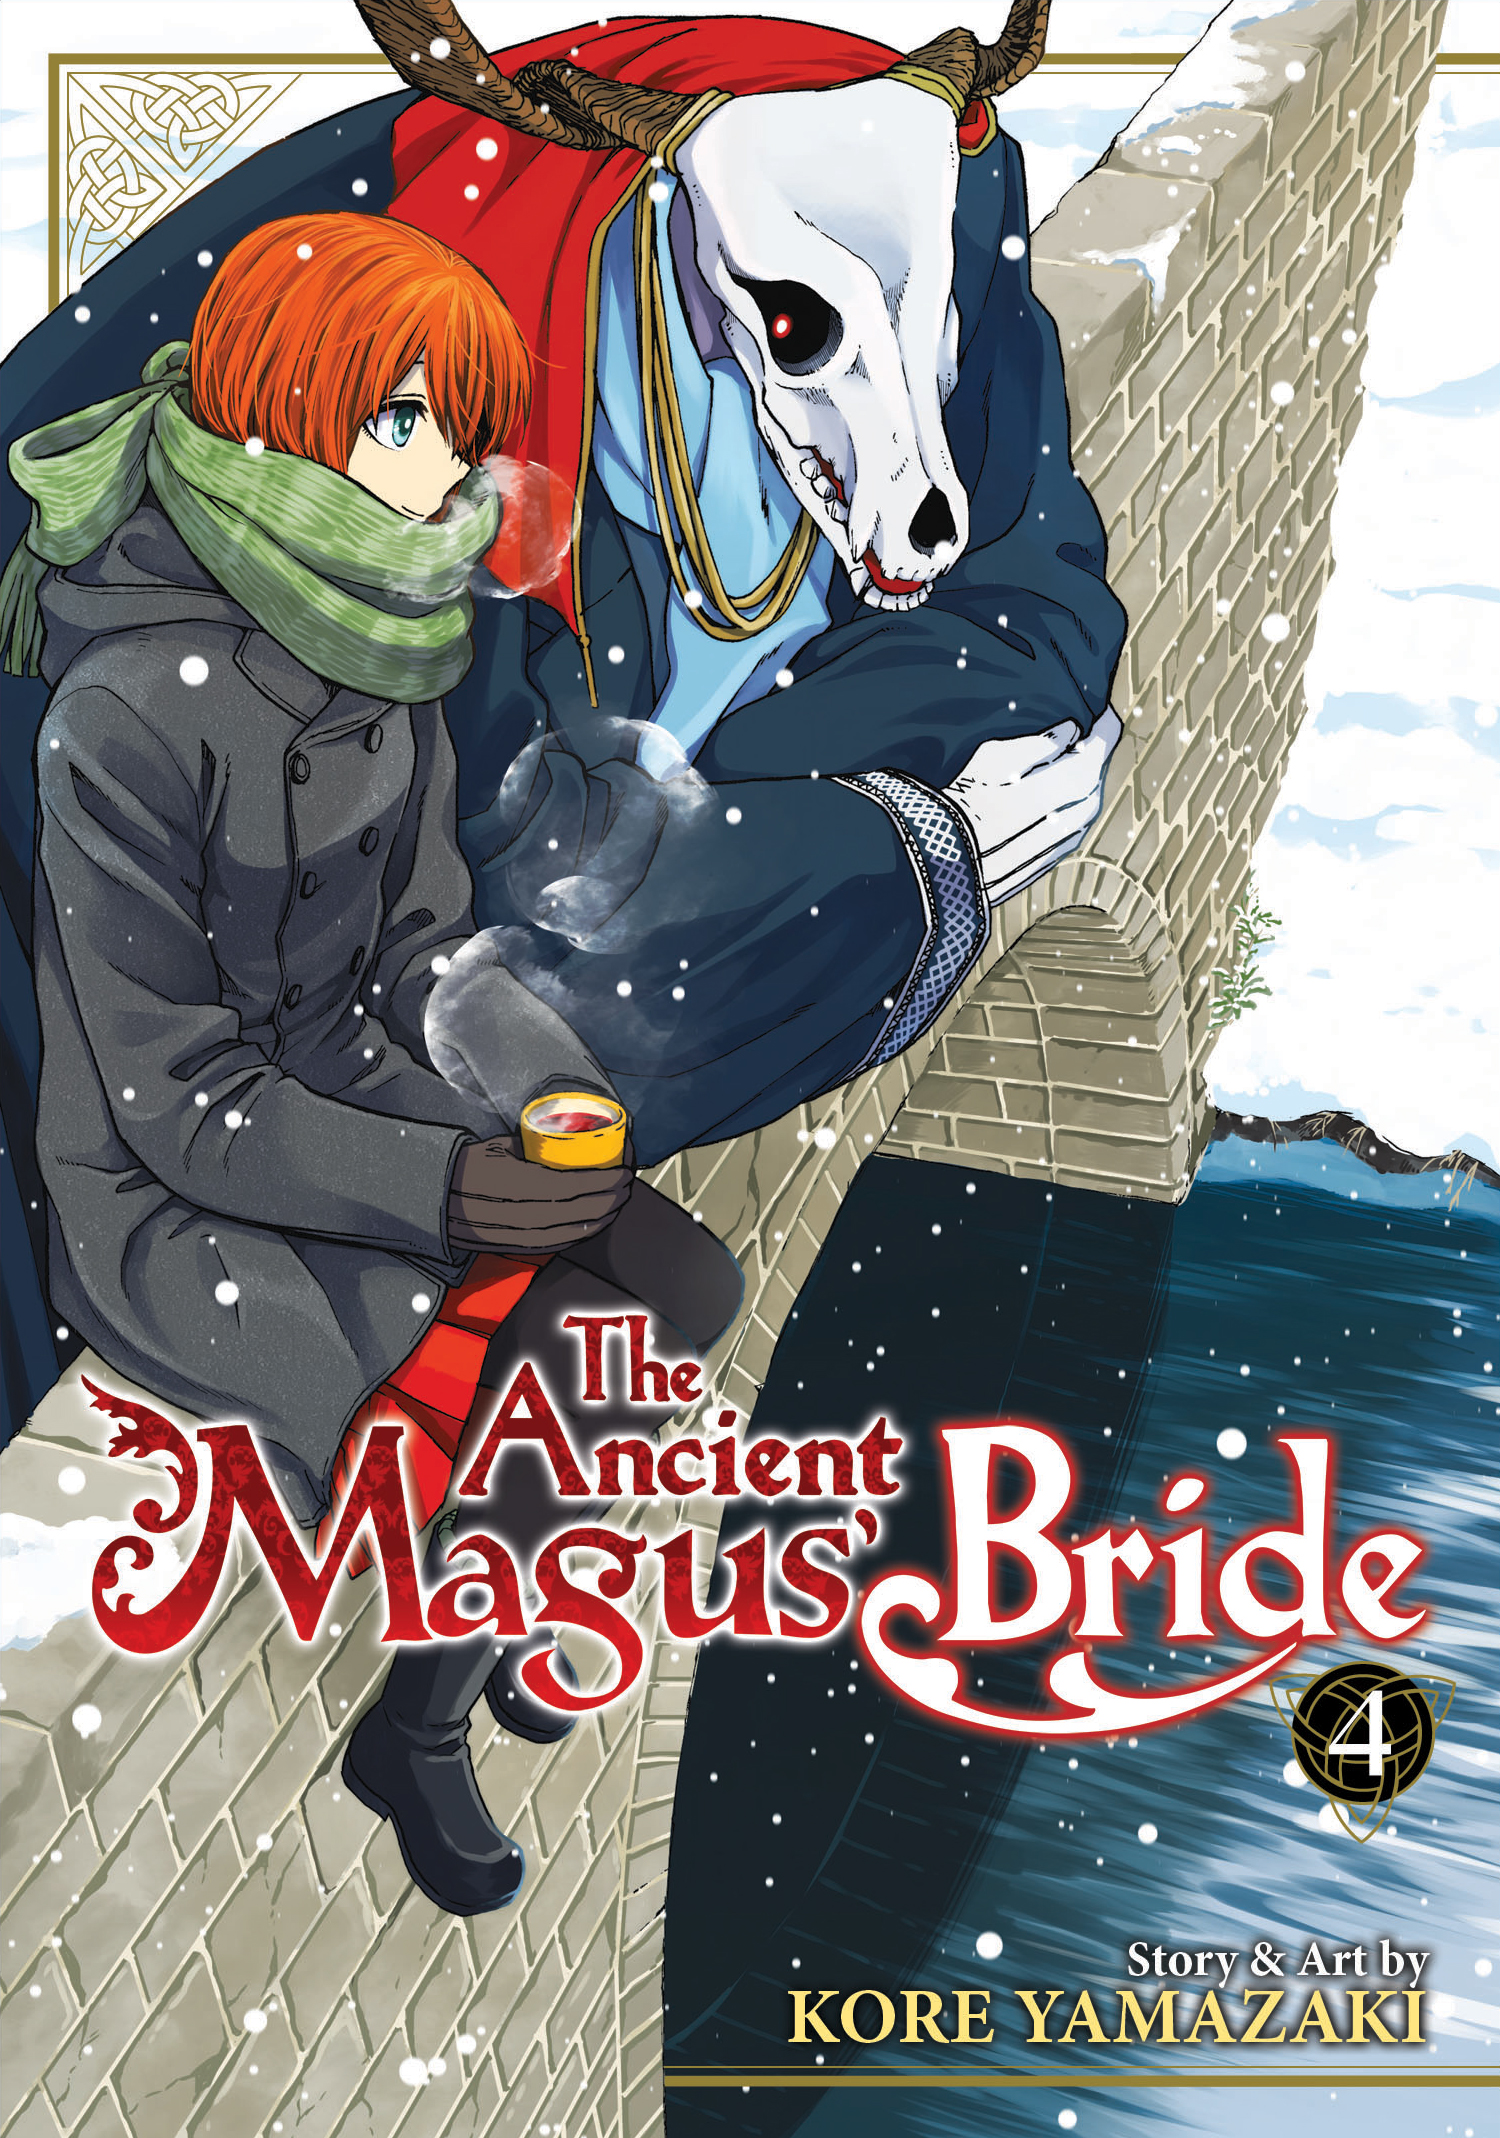 The Ancient Magus' Bride Manga Volume 4 image count 0